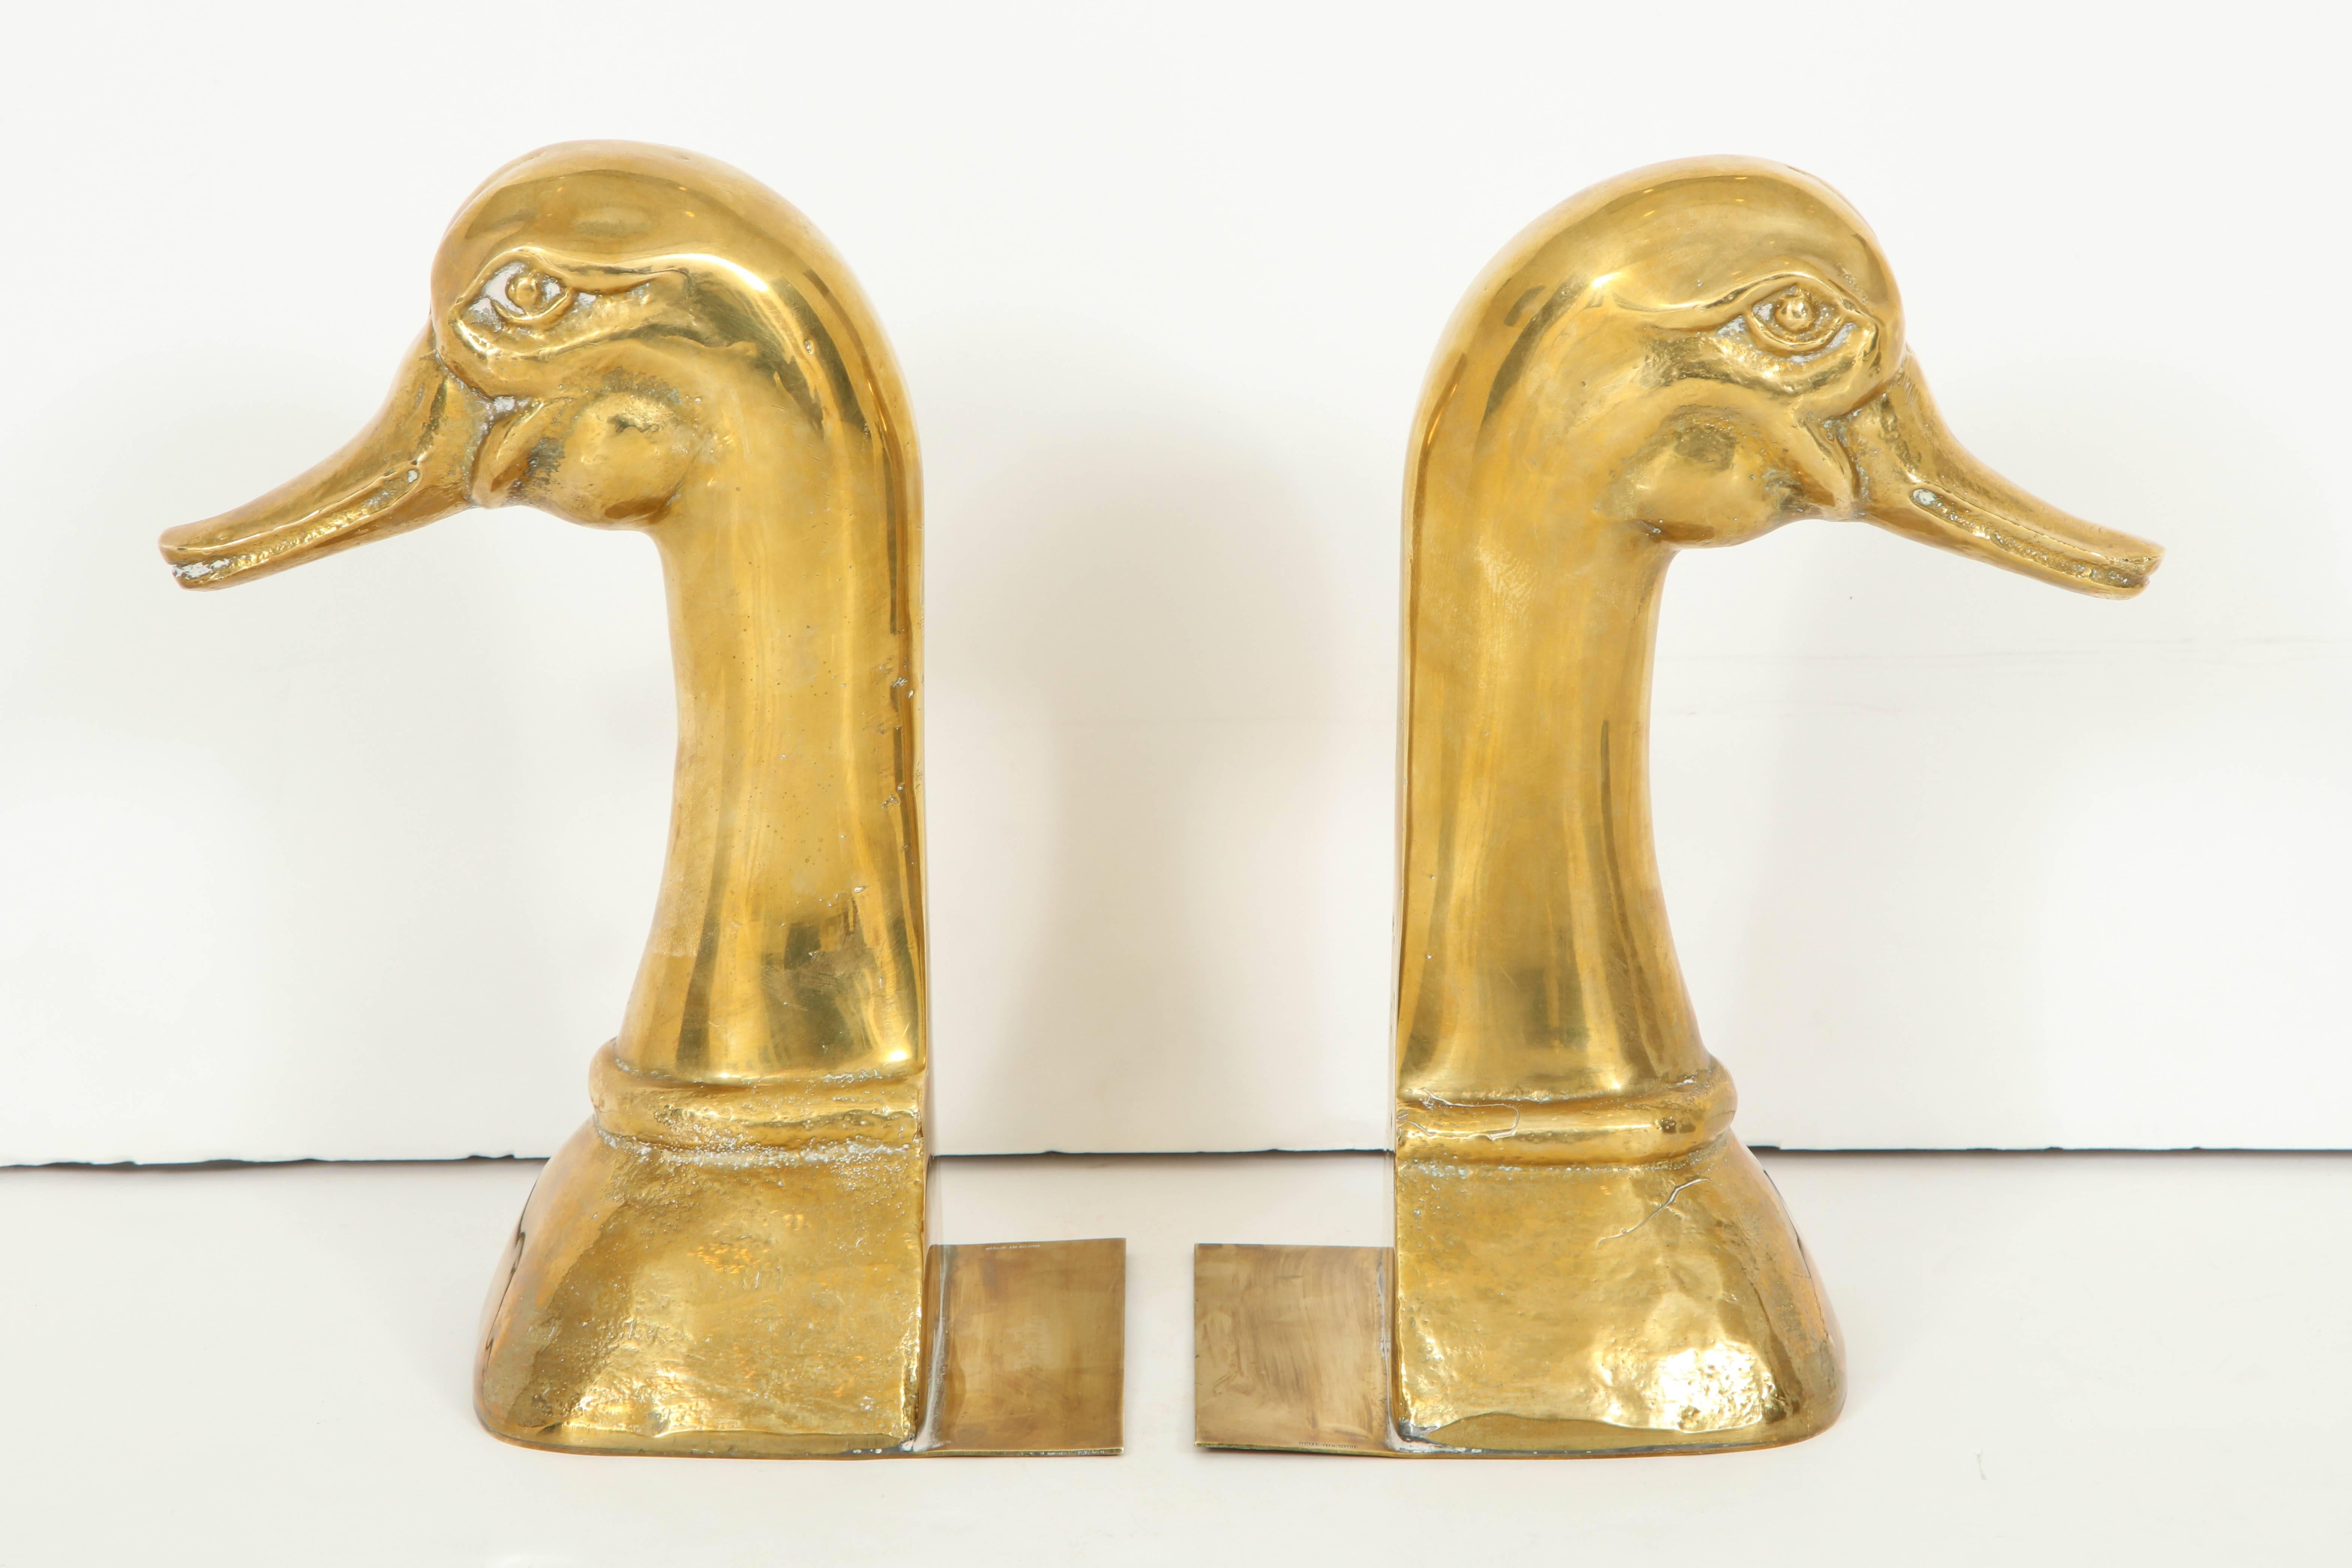 Pair of Duck bookends by Sarreid.
The hefty polished brass duck heads have a beautiful patina to them; they each have a thin plinth which slides under the ends of the books.